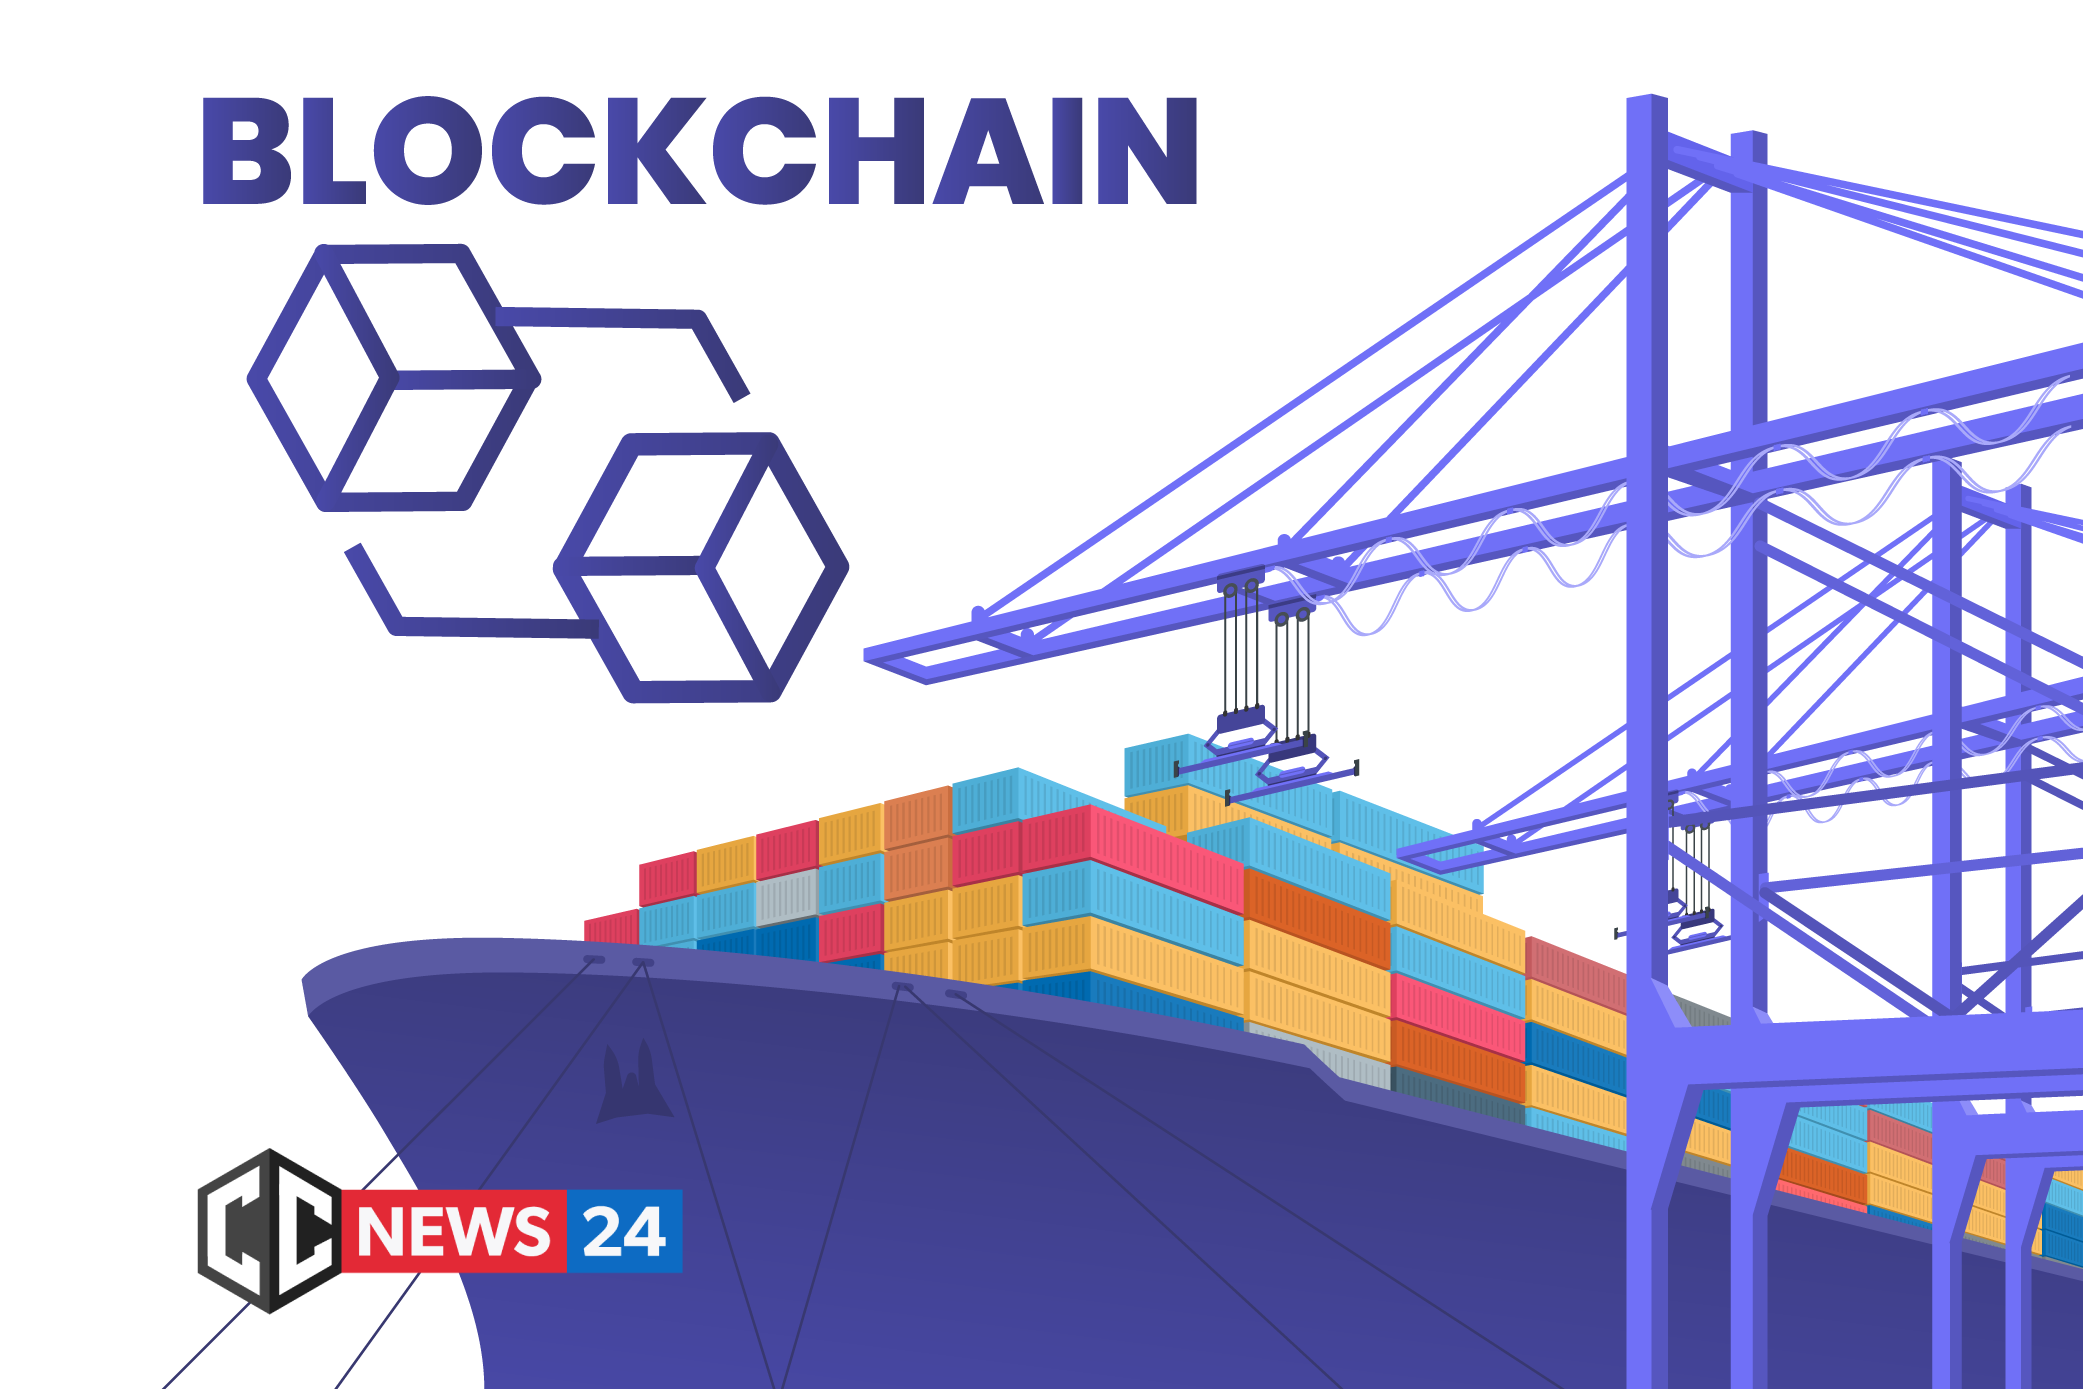 China Merchants Port today signed a intelligent port project in Greater Bay area built on Blockchain